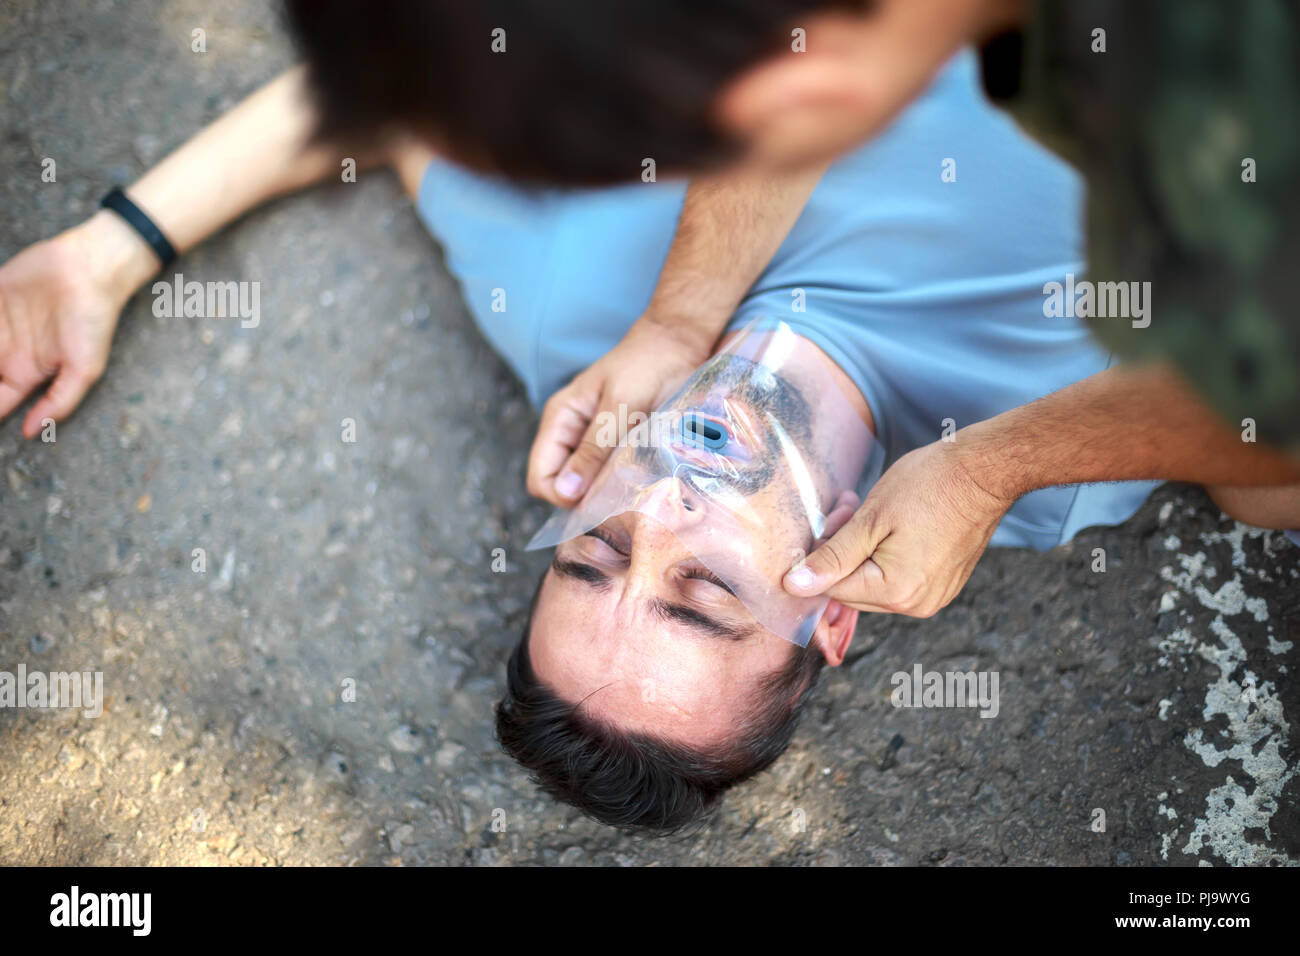 Man giving first aid to a person by using the savior's handkerchief. First Aid Stock Photo